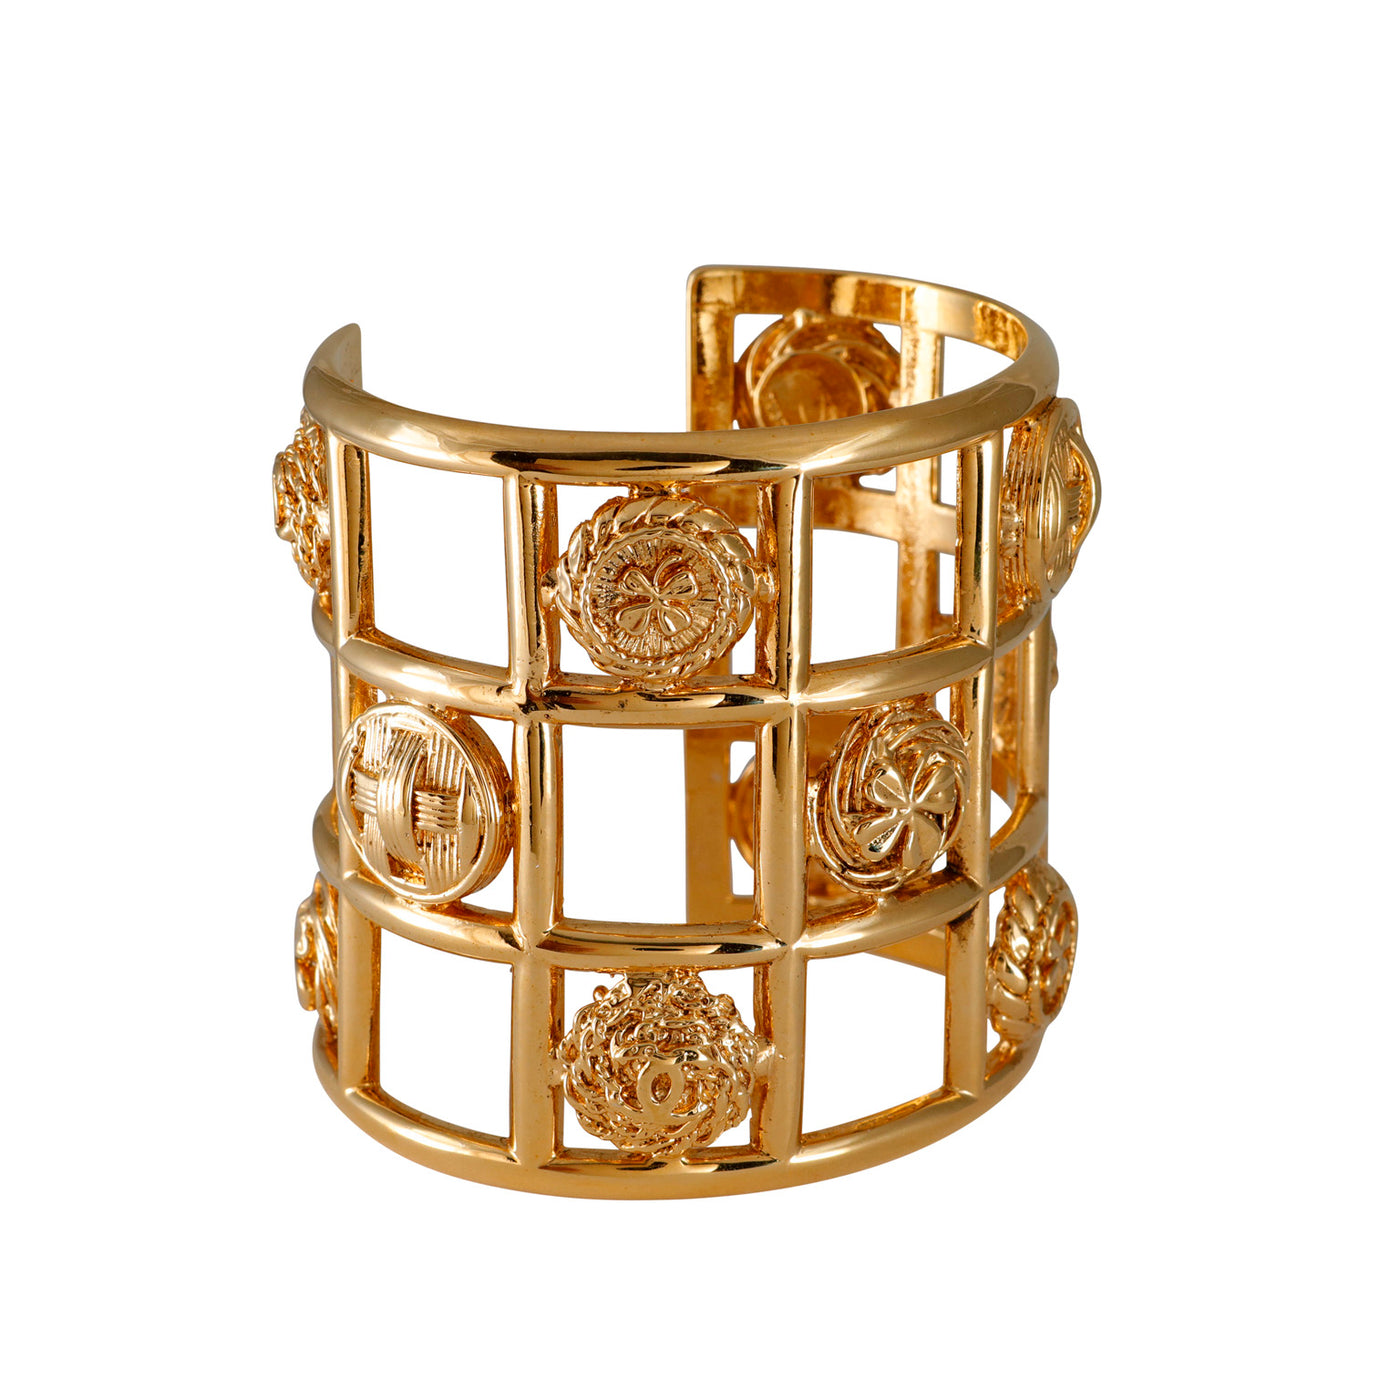 Chanel Gold Plated Clover Cuff